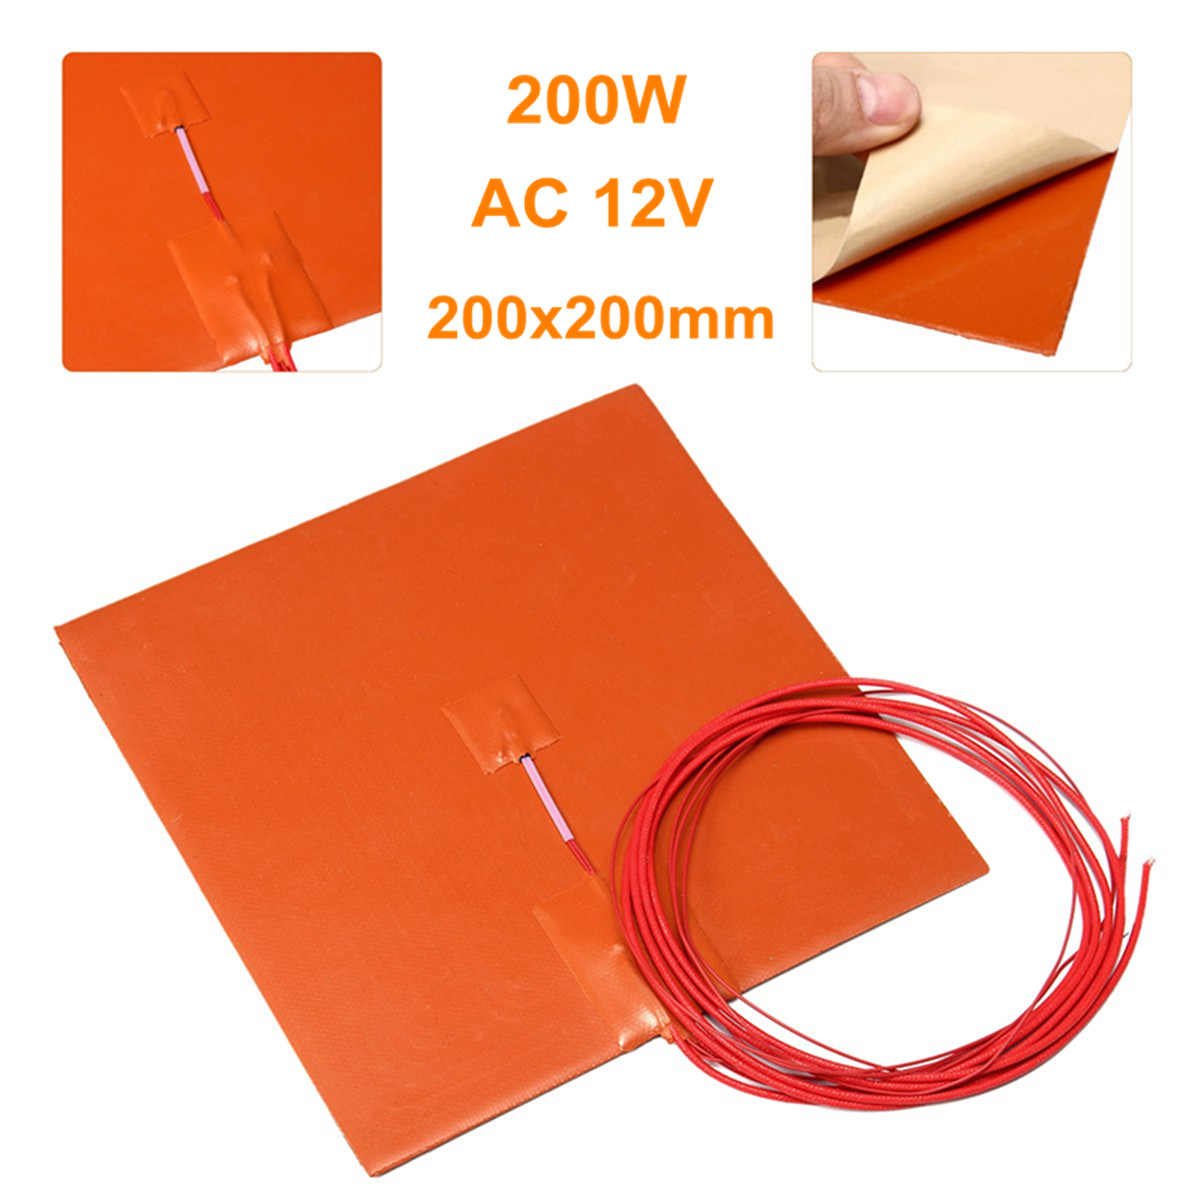 12V 50W 100mm x 100mm Heated Heater Pad Silicone Mat For 3D Printer Heat Bed 